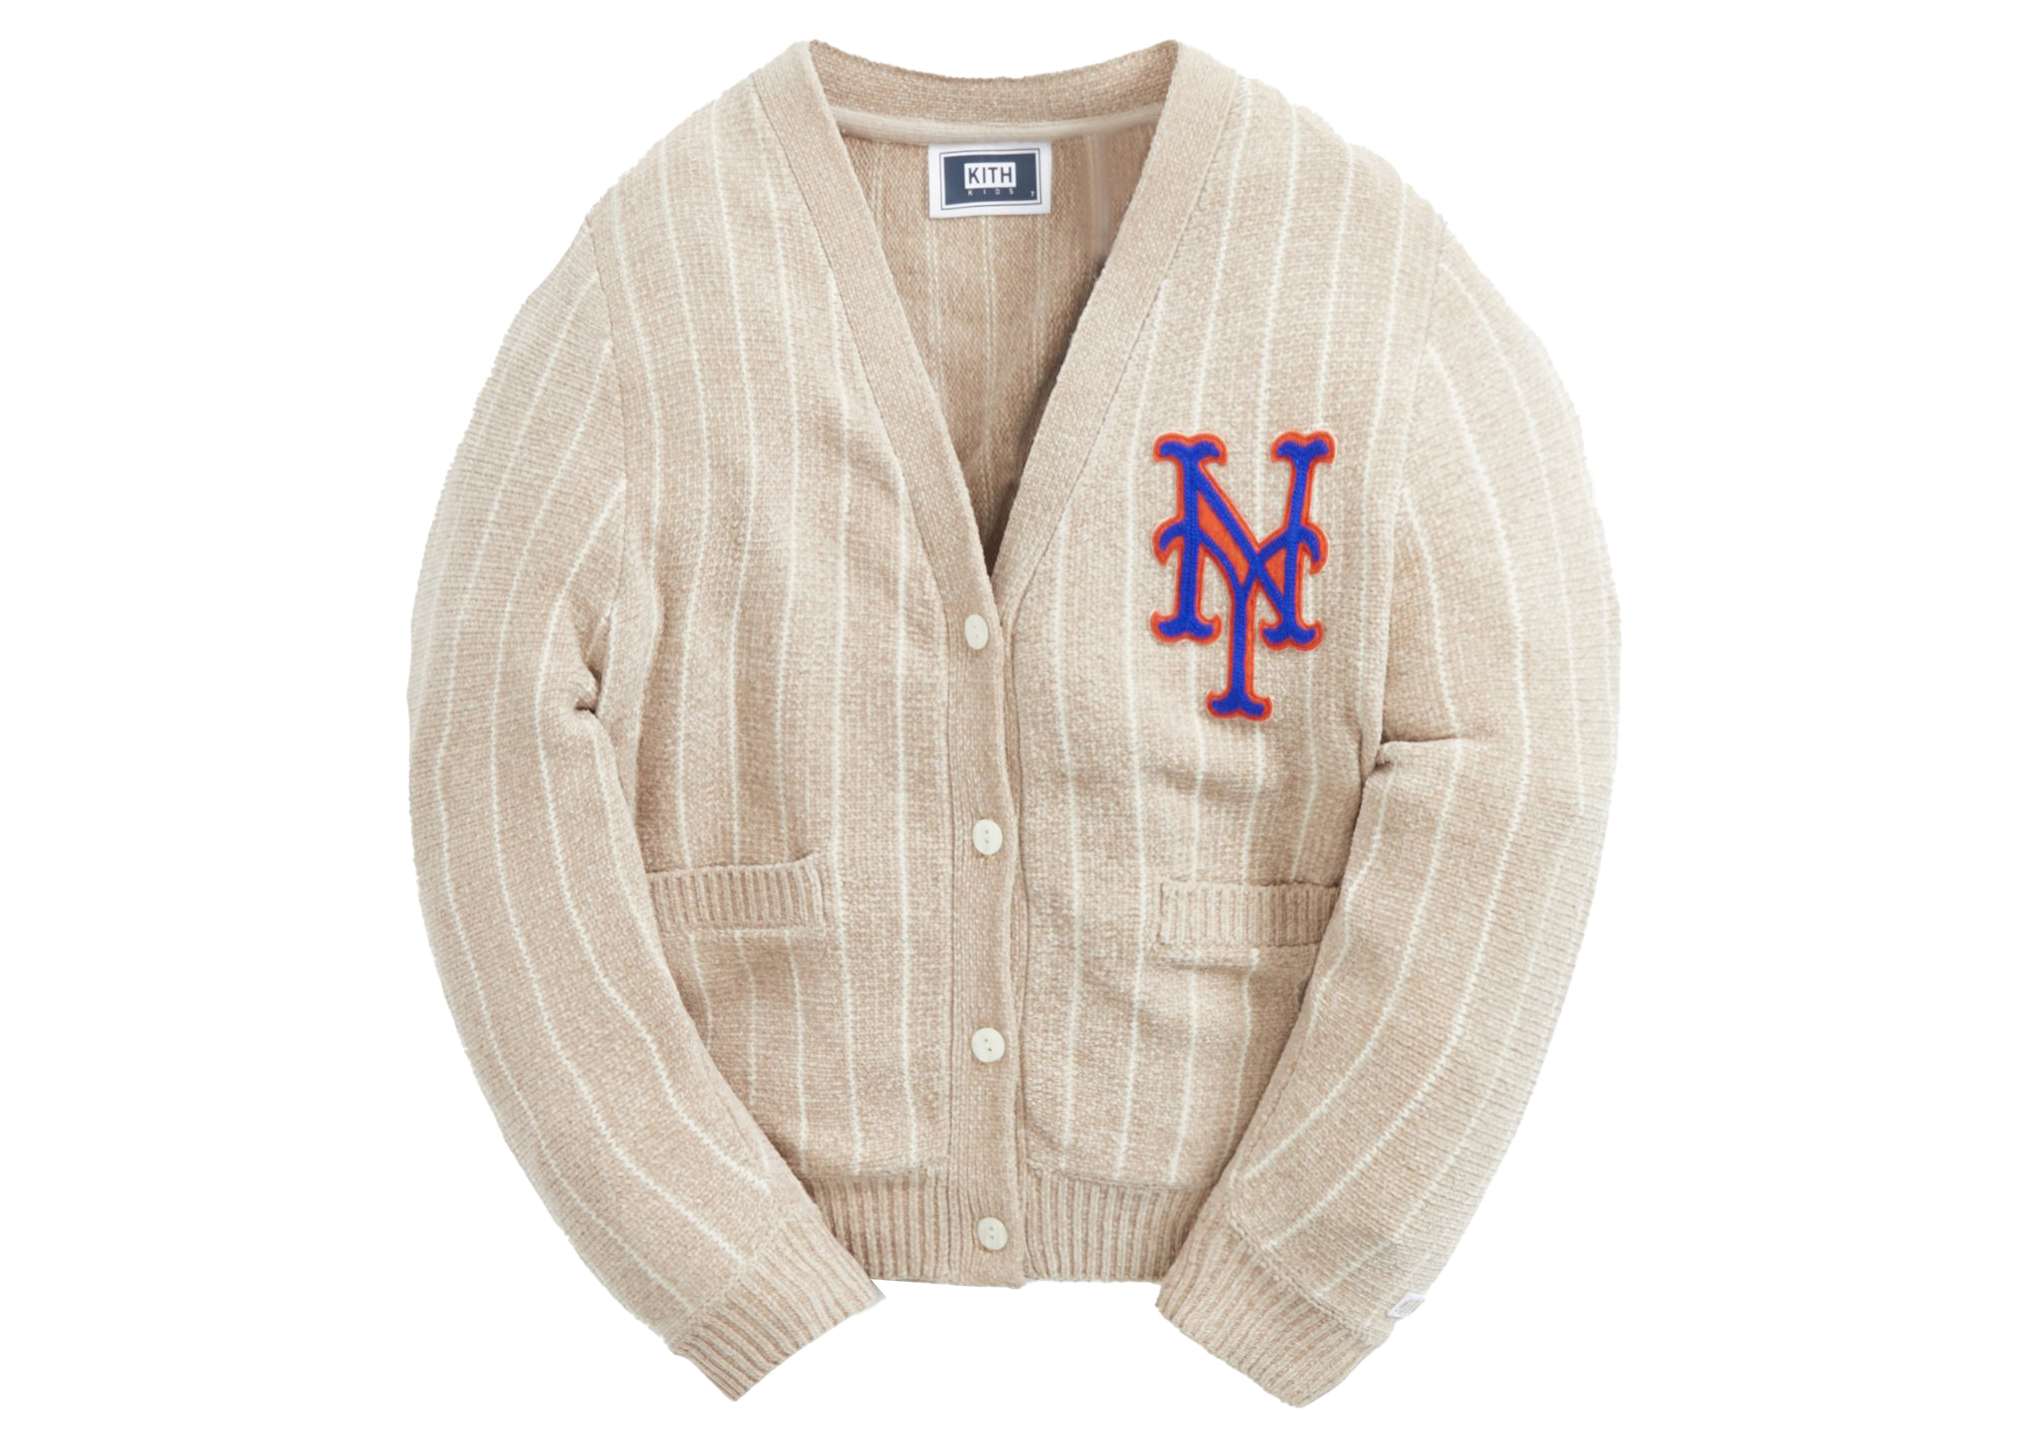 Kith Kids & MLB for New York Yankees Cardigan Oatmeal キッズ